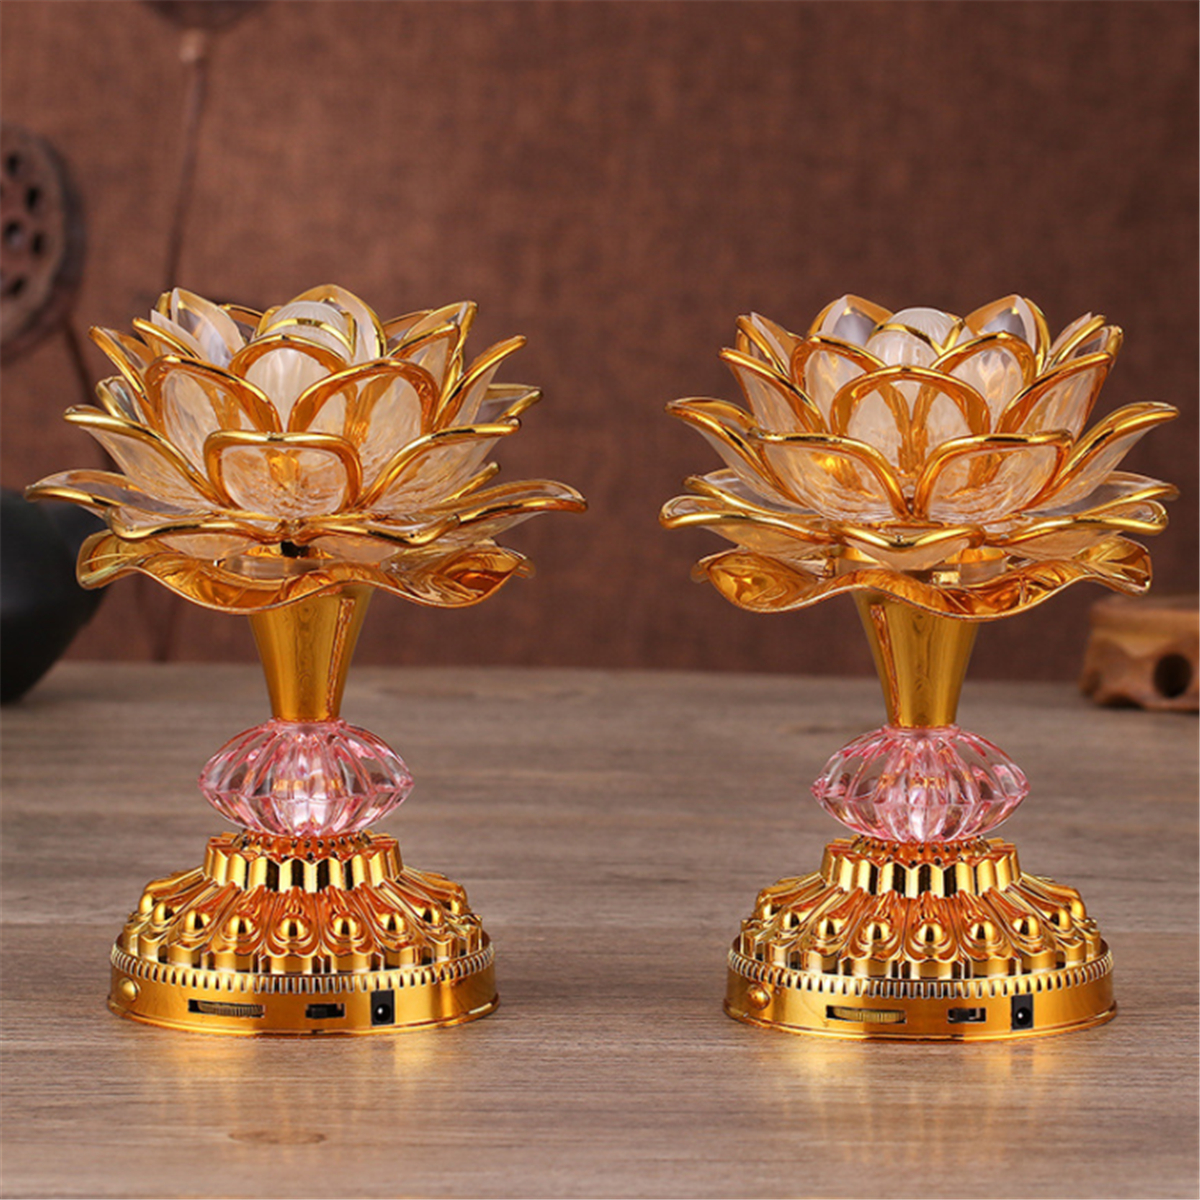 Find 53 Buddhism Song 7 Color Changing Lotus LED Night Light Music Holiday Lamp Decoration for Sale on Gipsybee.com with cryptocurrencies